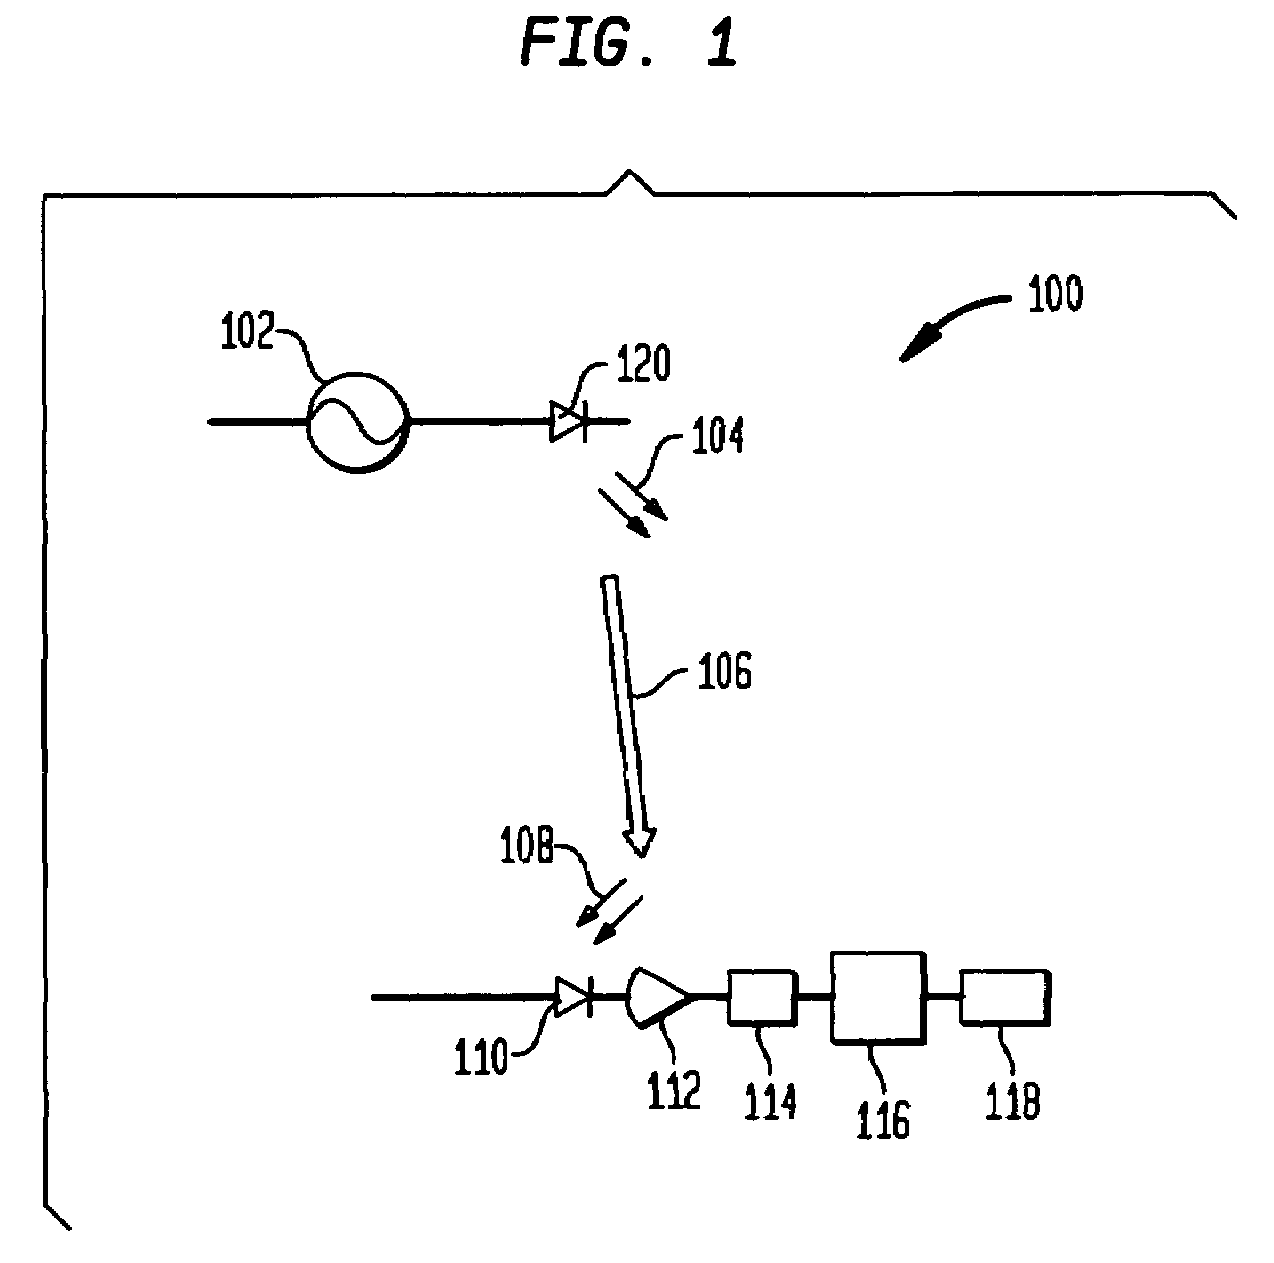 Optical detection of proximity of patient to a gamma camera